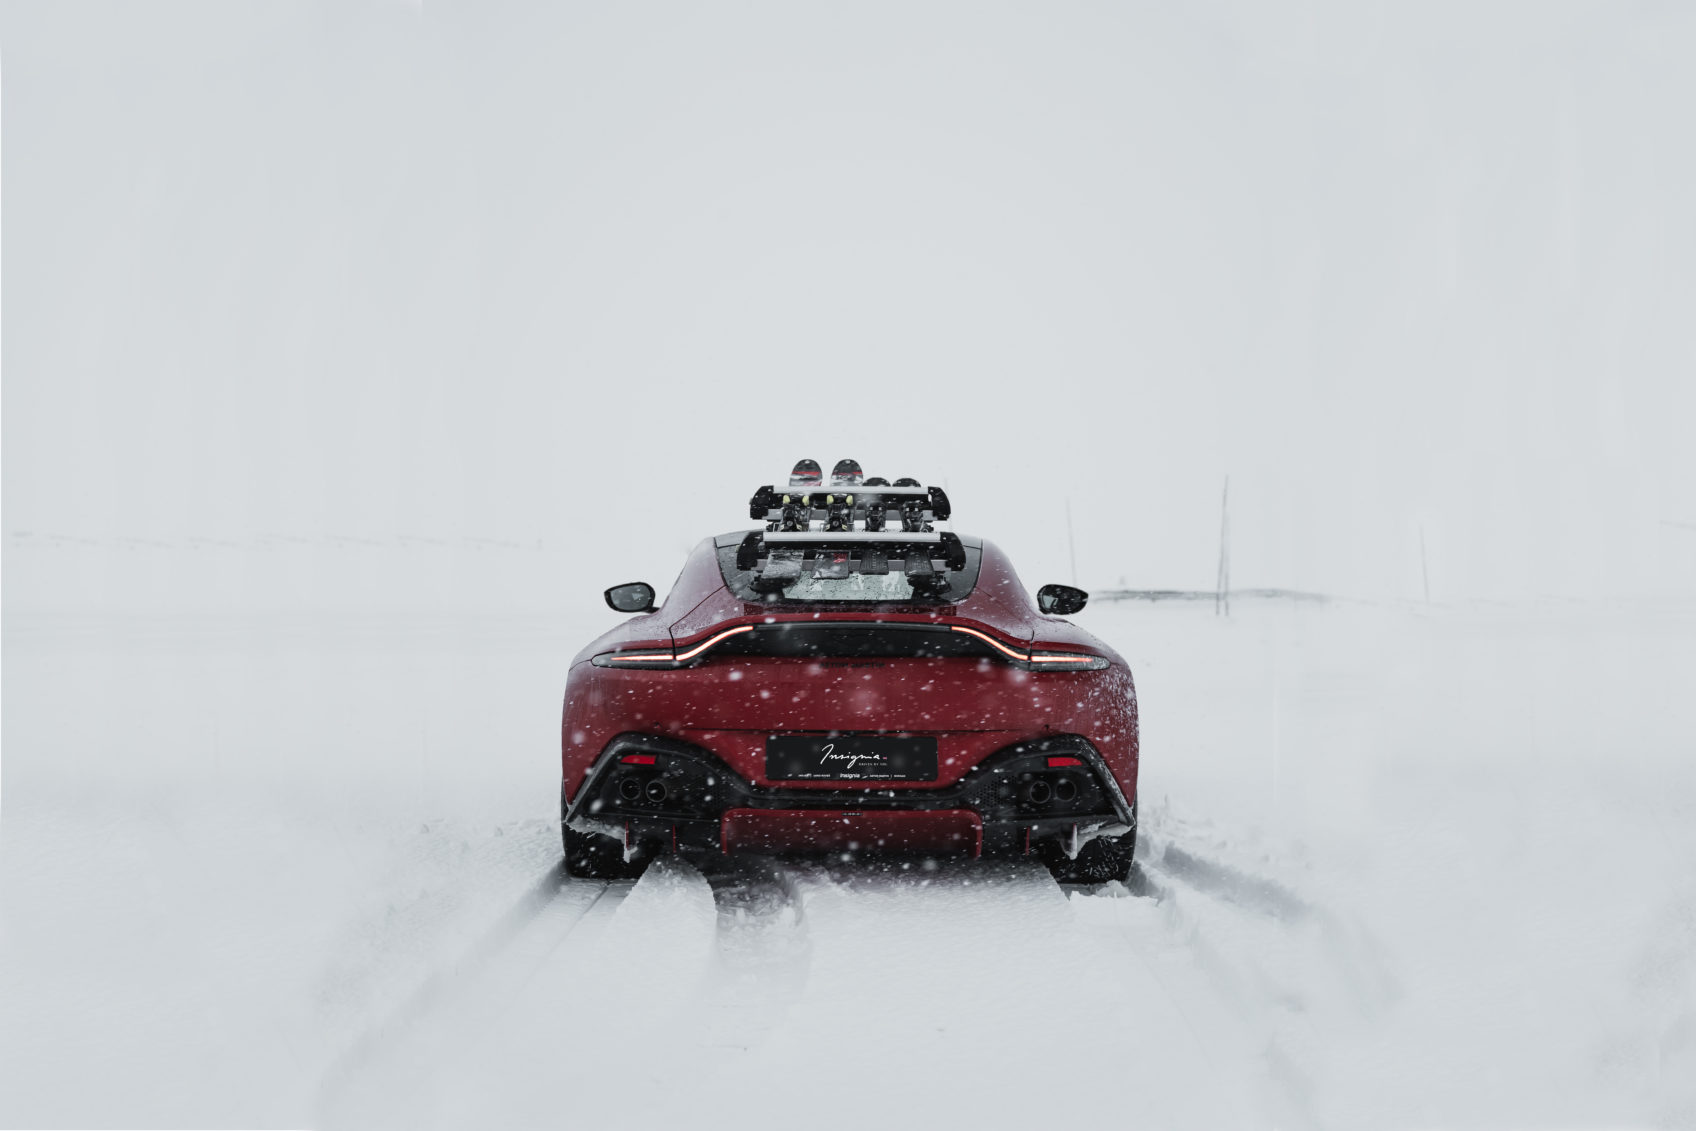 Picture of Aston Martin in snow